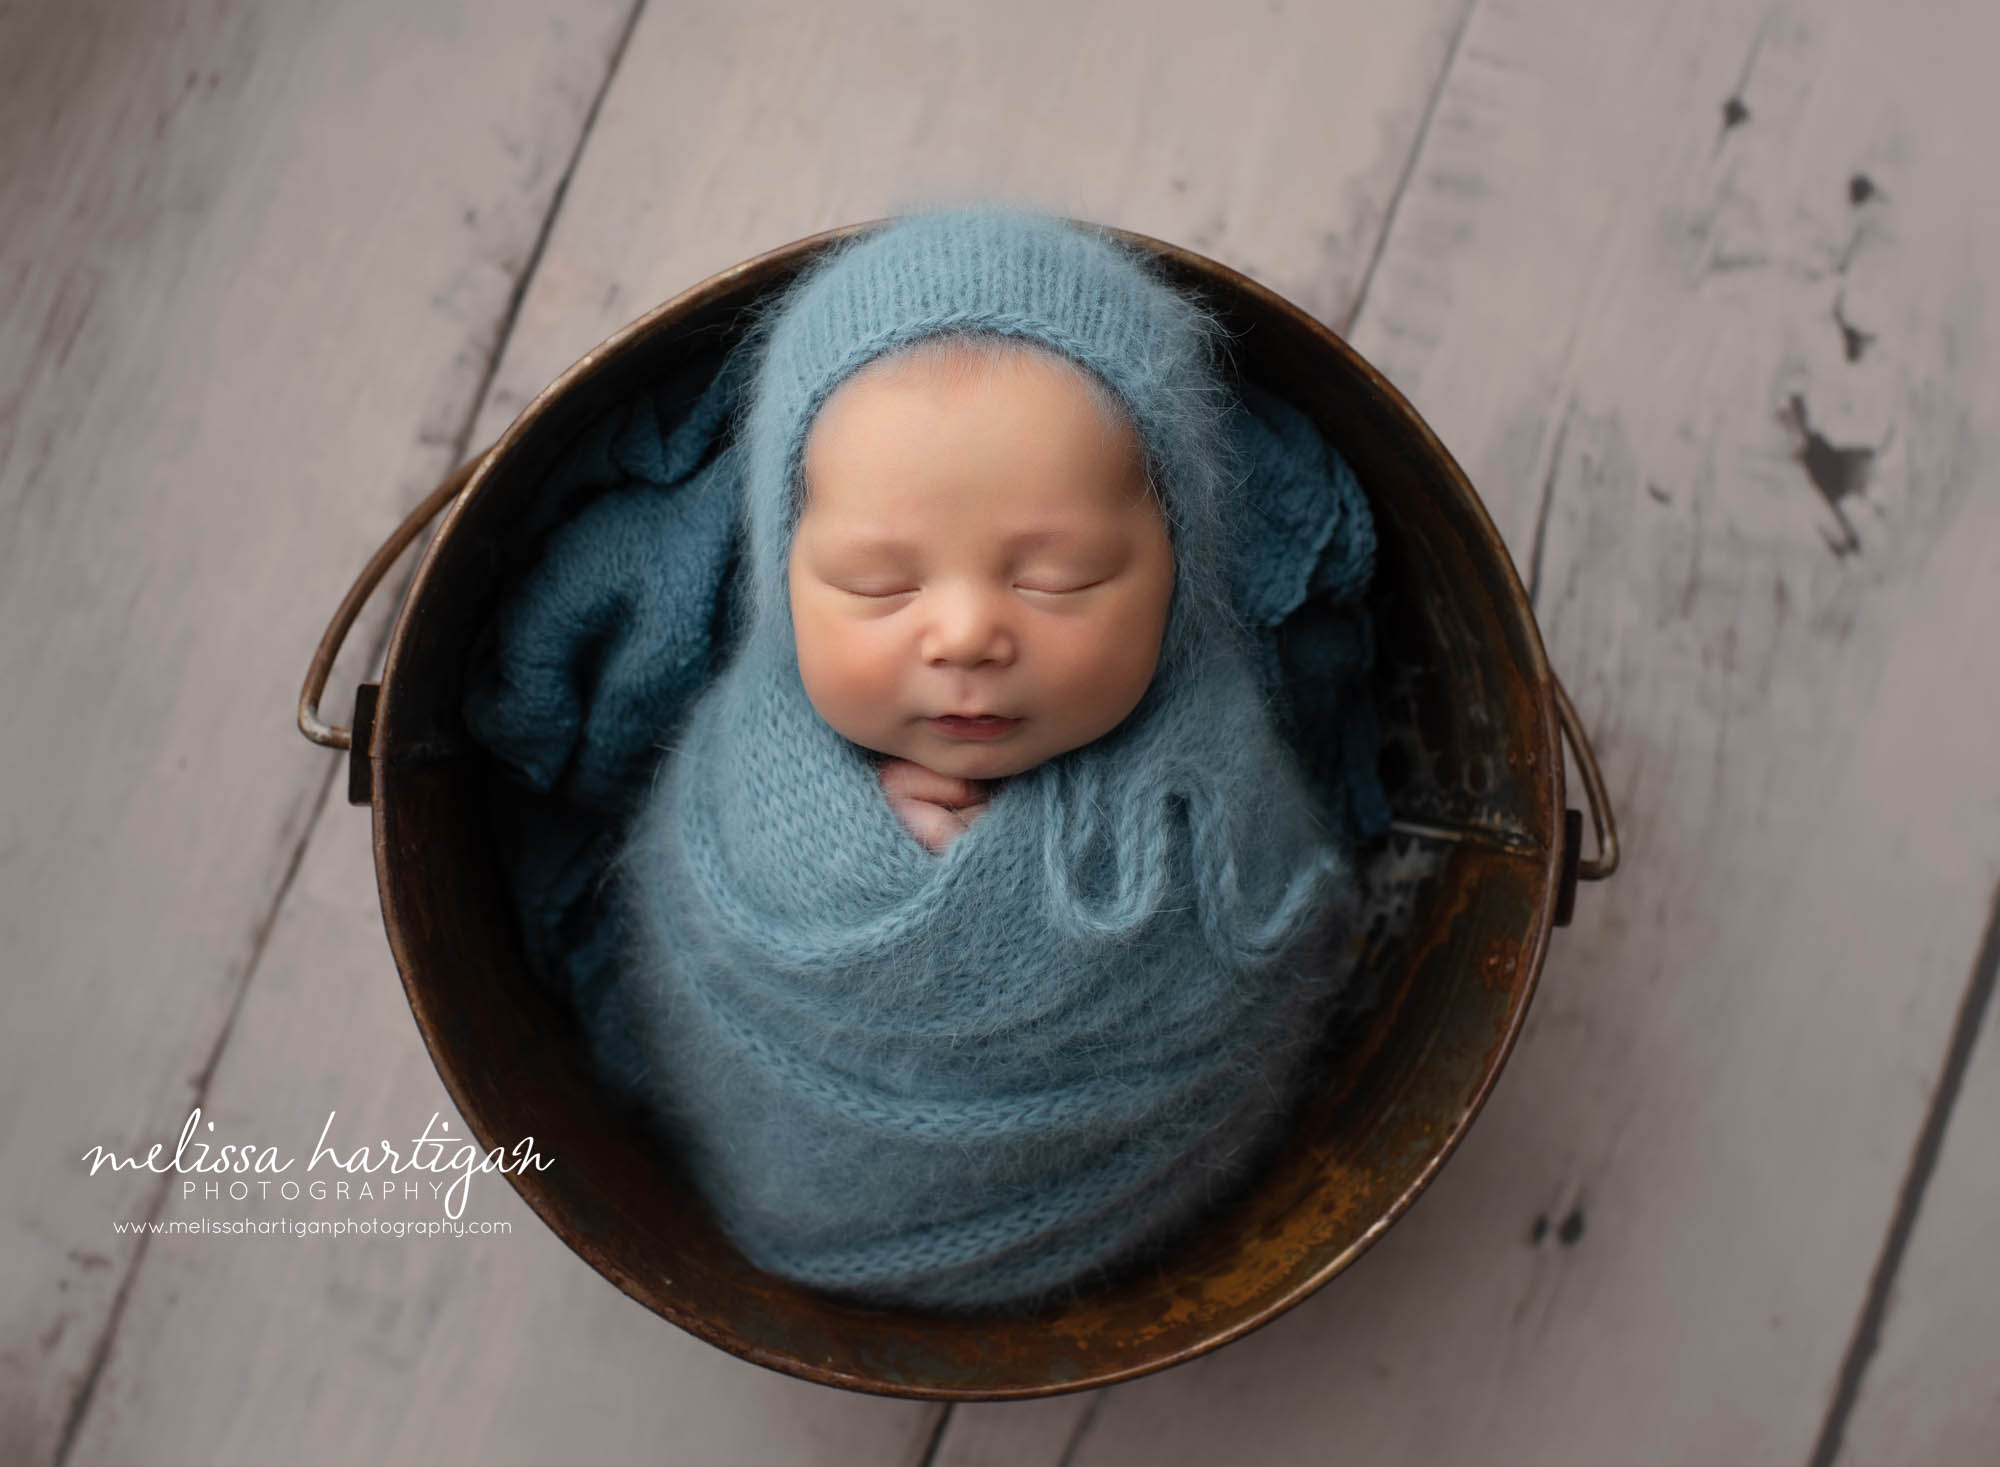 Baby boy sleeping and wrapped in blue with knitted bonnet